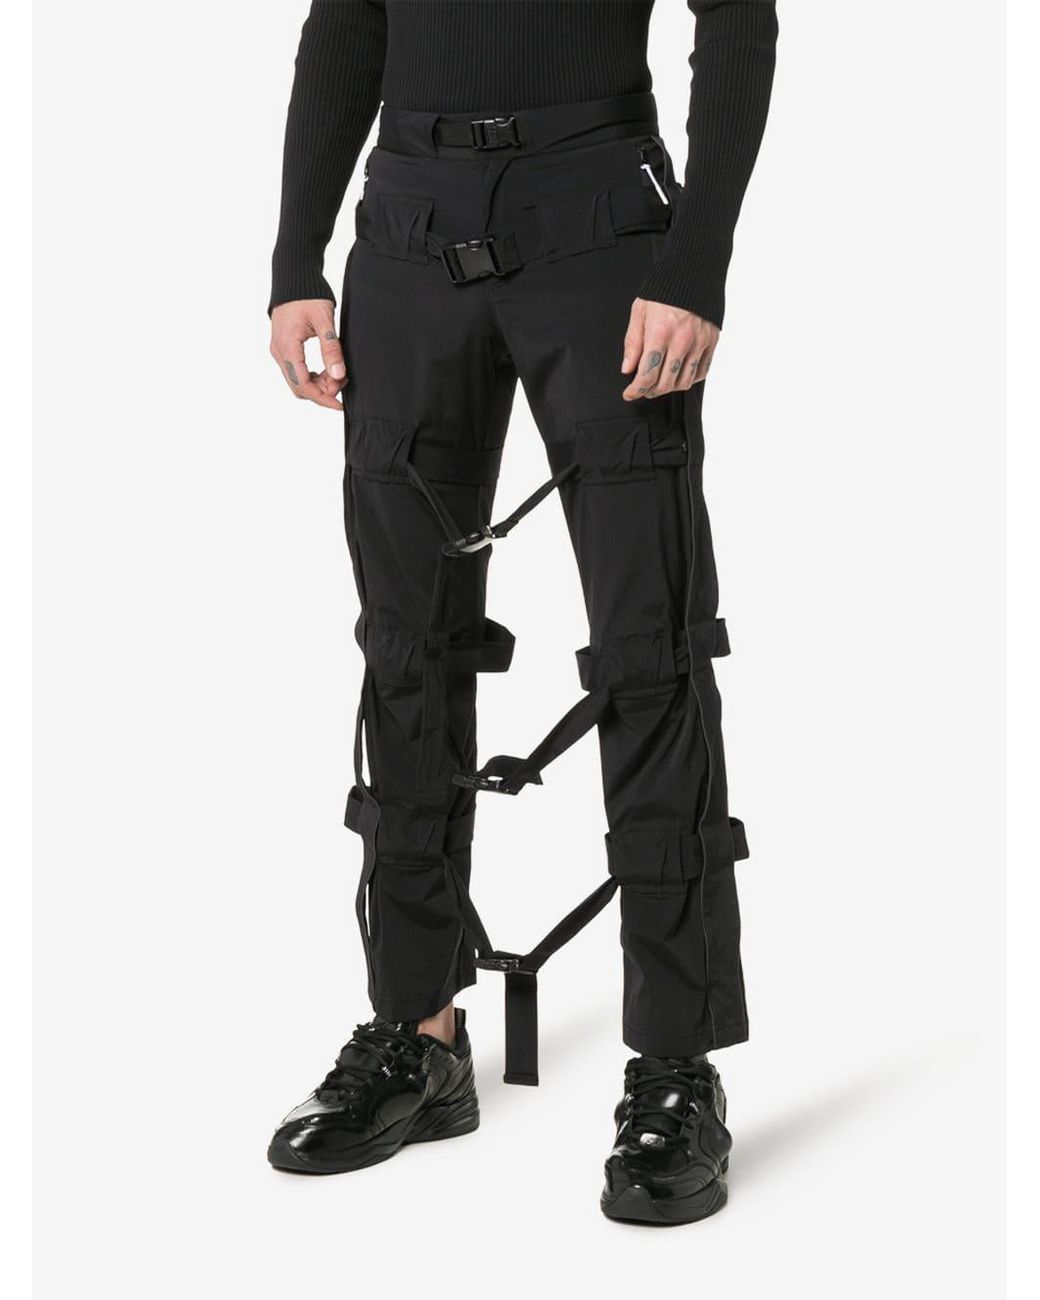 Tactical cargo pants with straps | Techwear